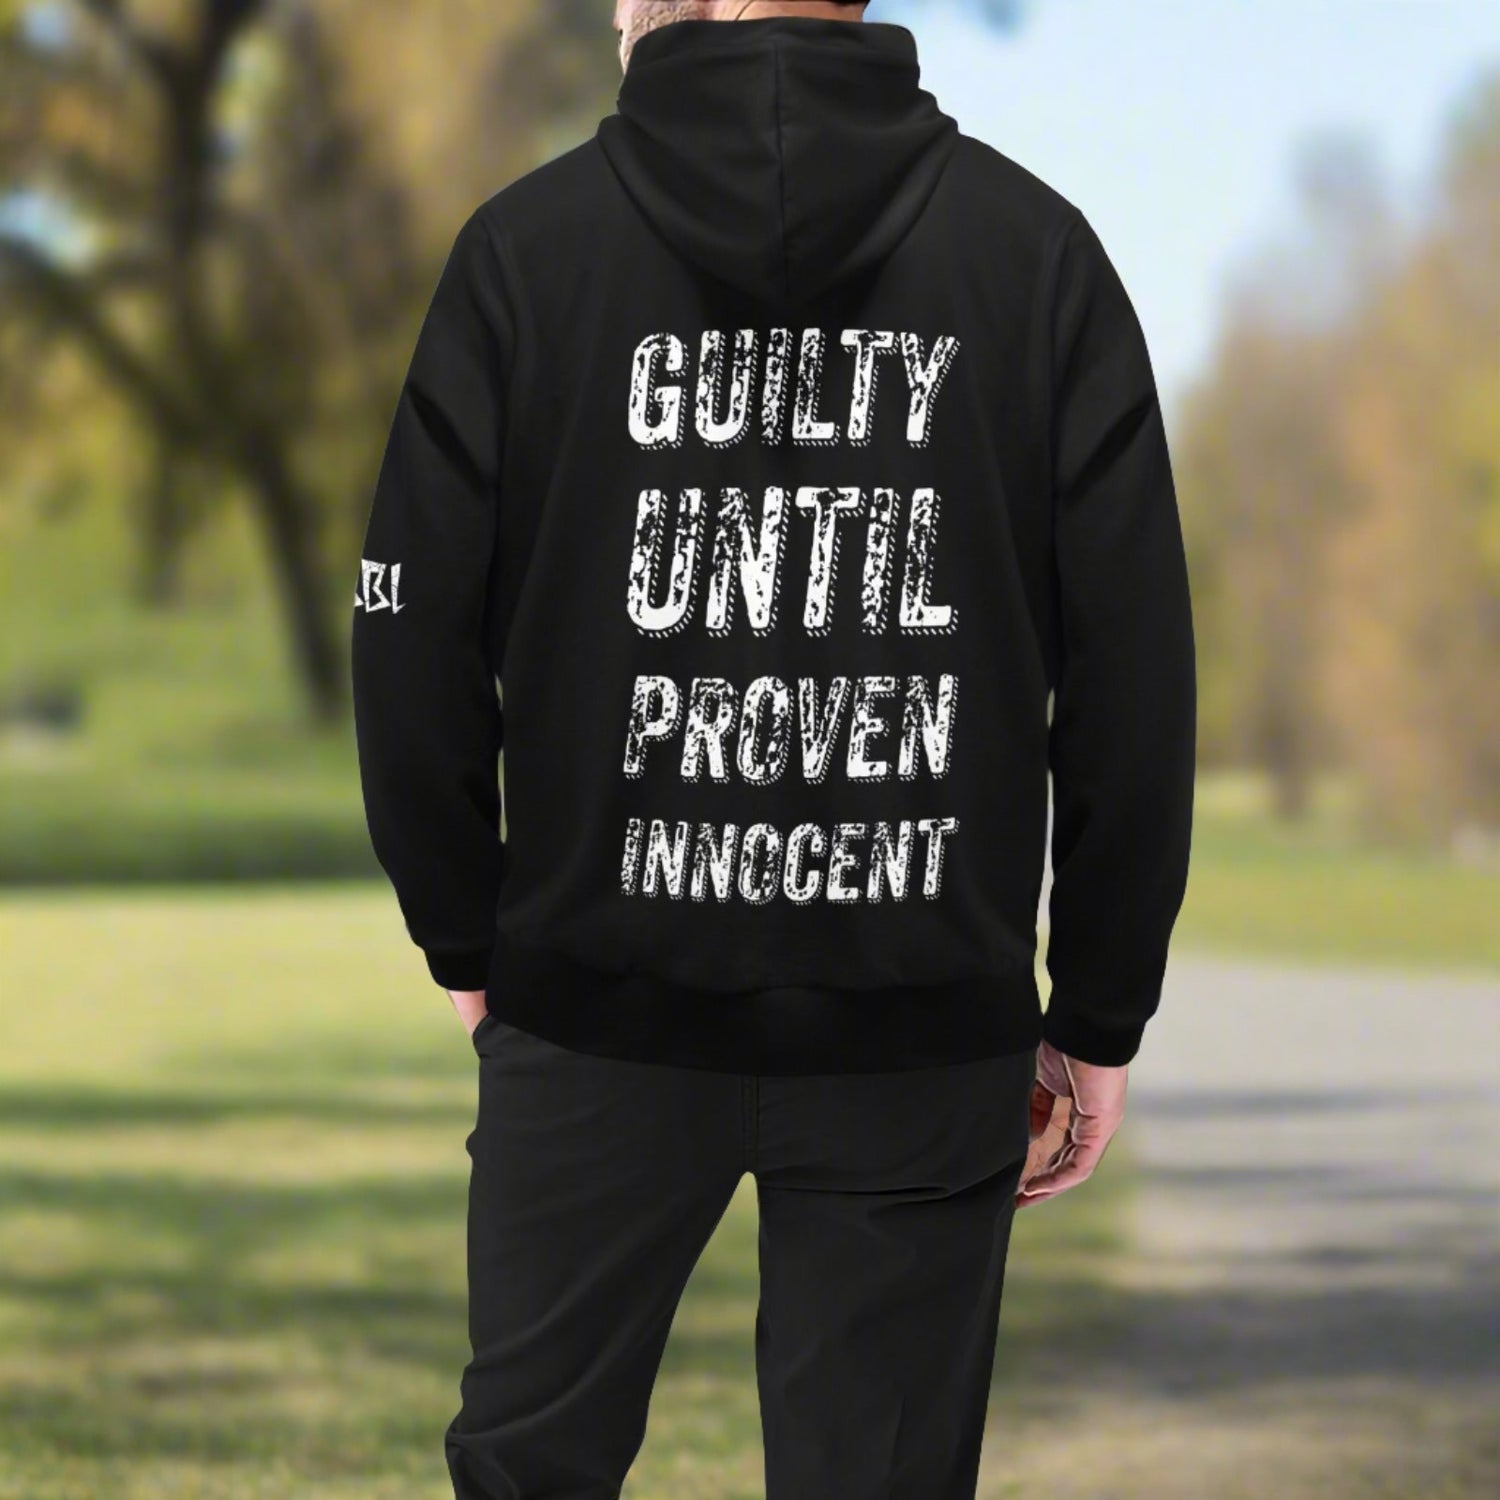 Men's Hoodie, Jumpers and Jackets